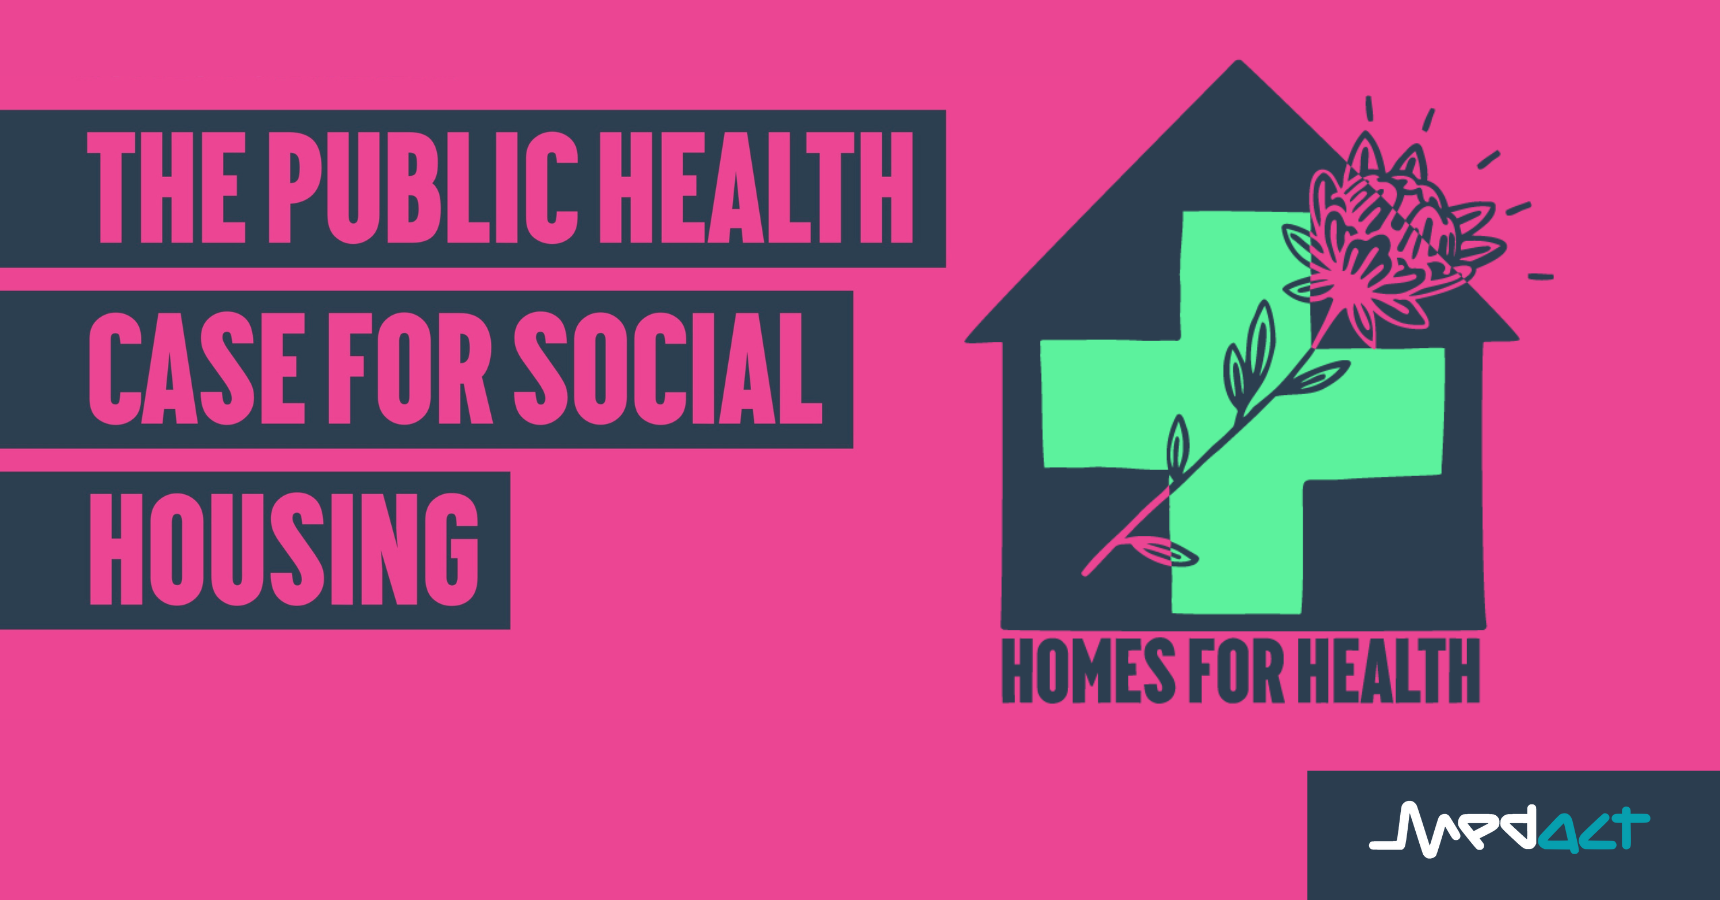 Homes for Health: The Public Health Case for Social Housing